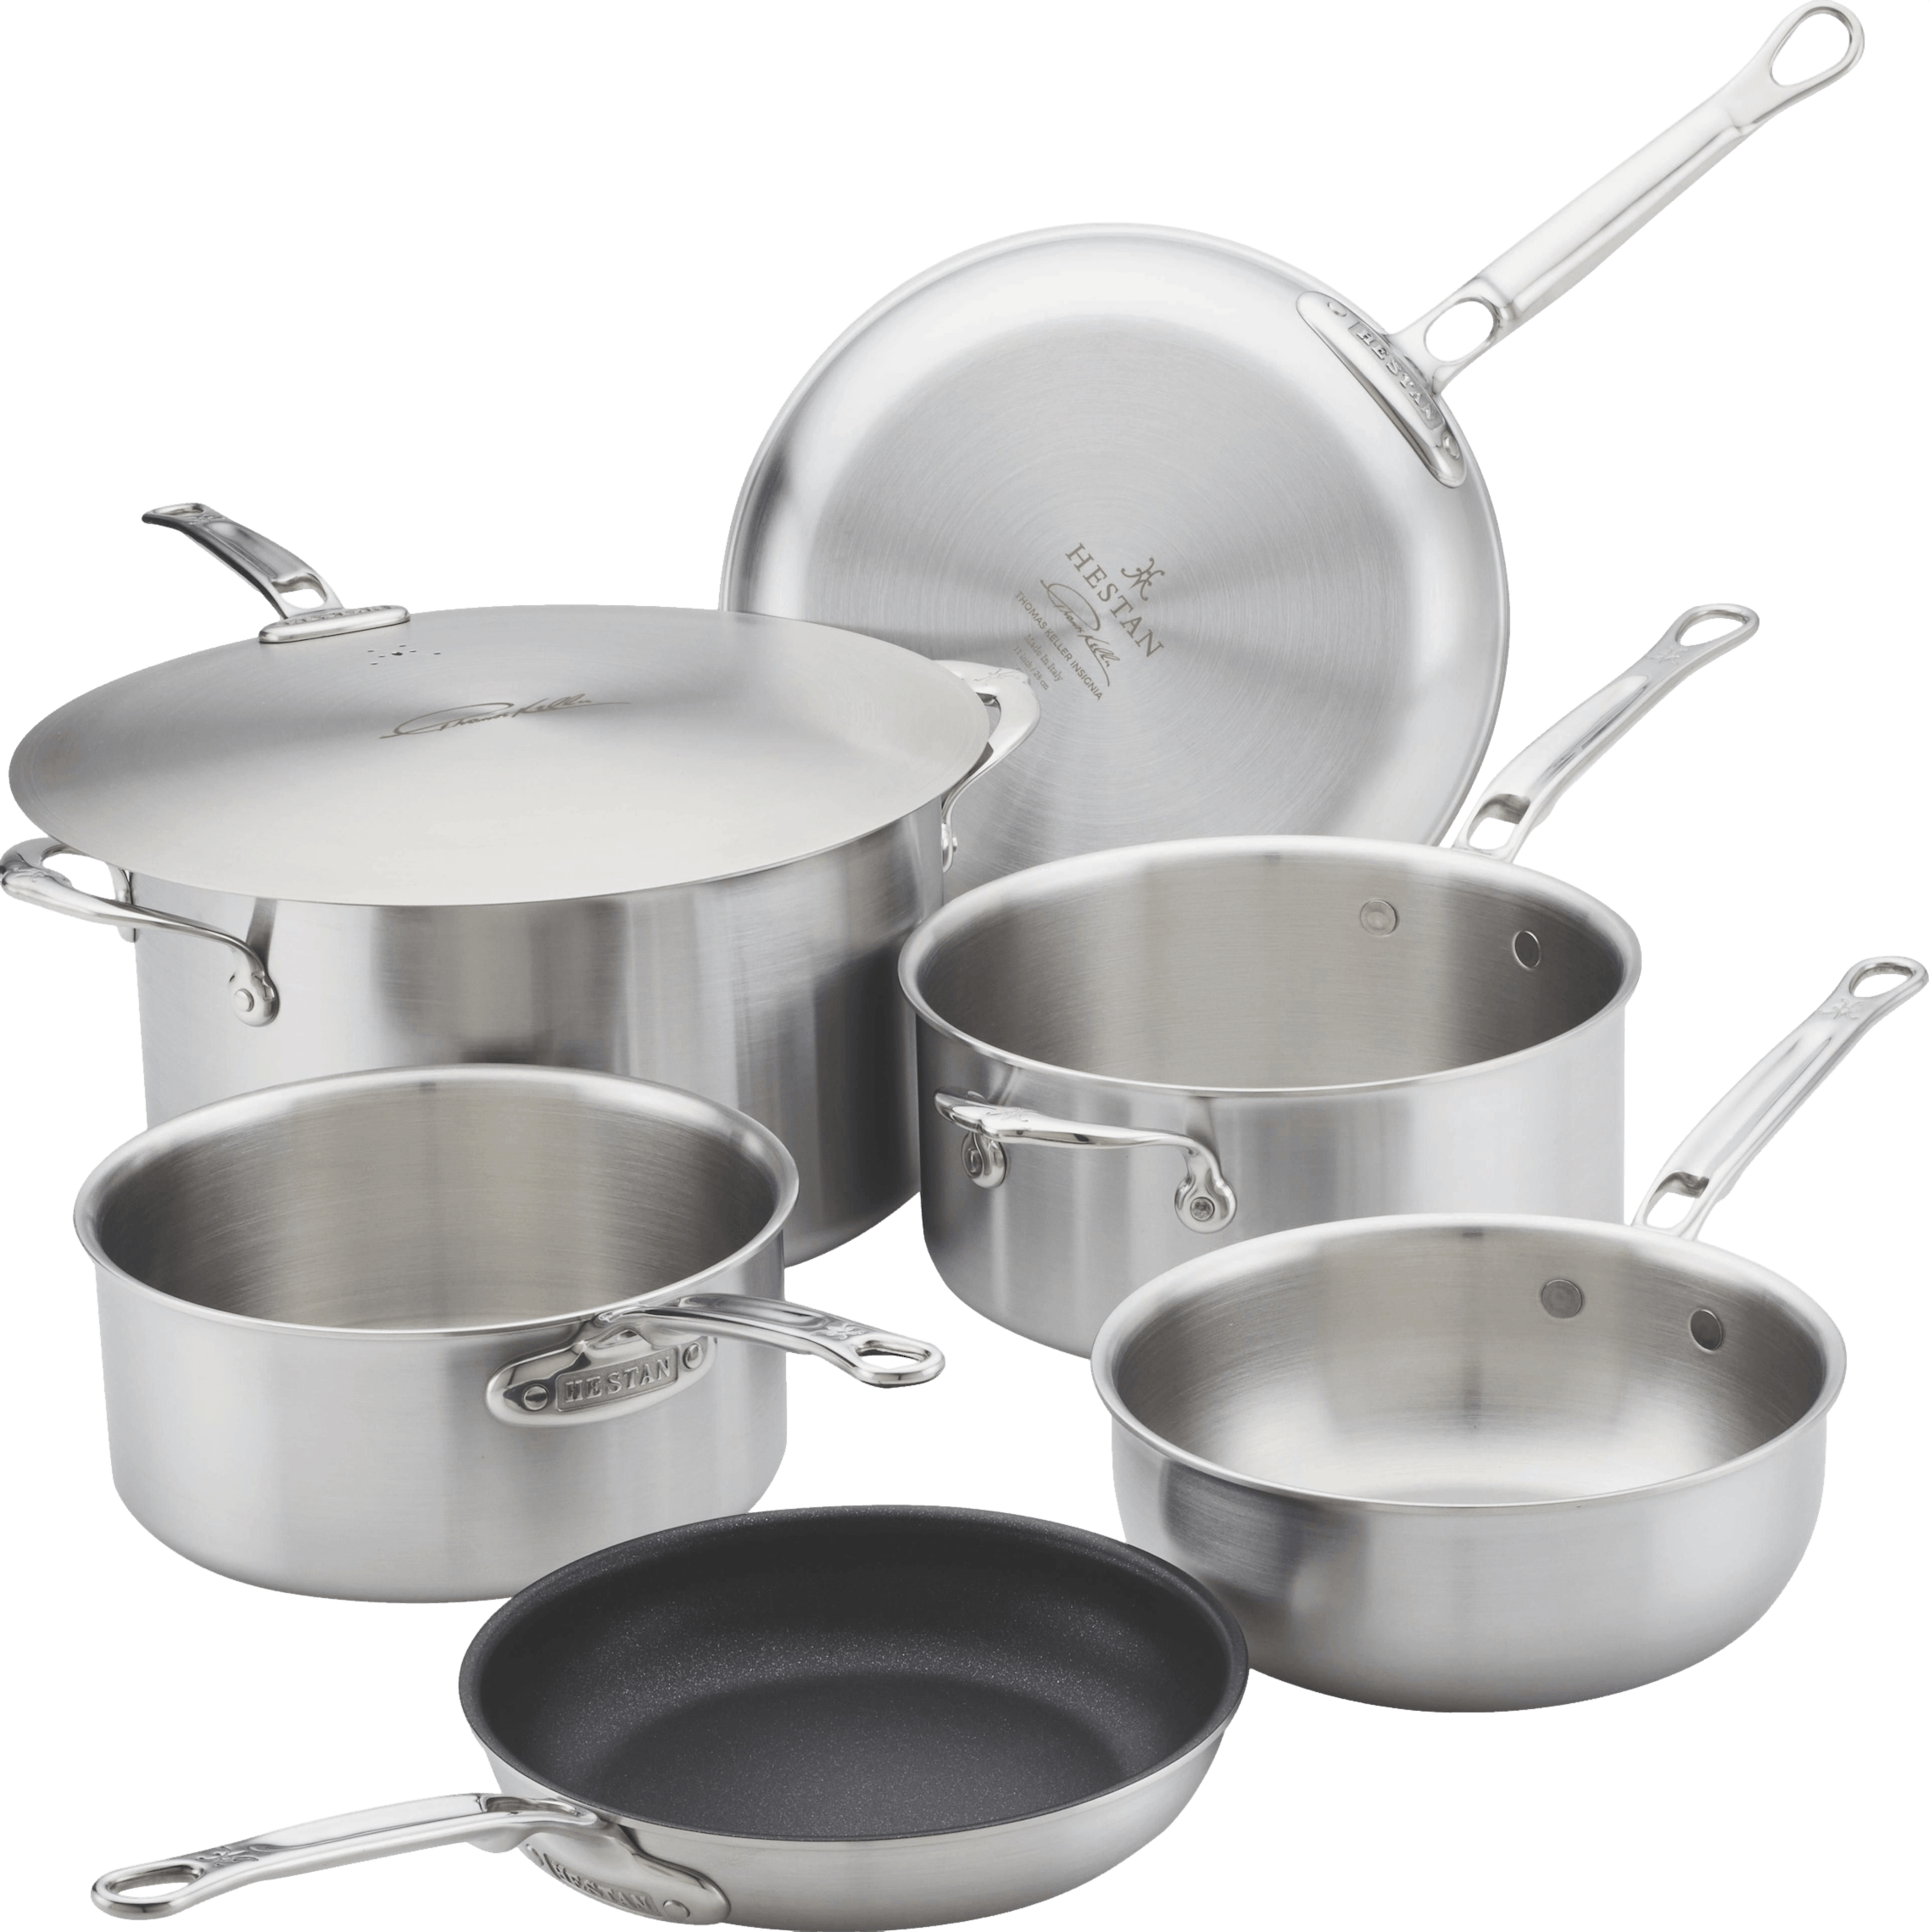 Thomas Keller Insignia Commercial Clad Stainless Steel 11-Piece